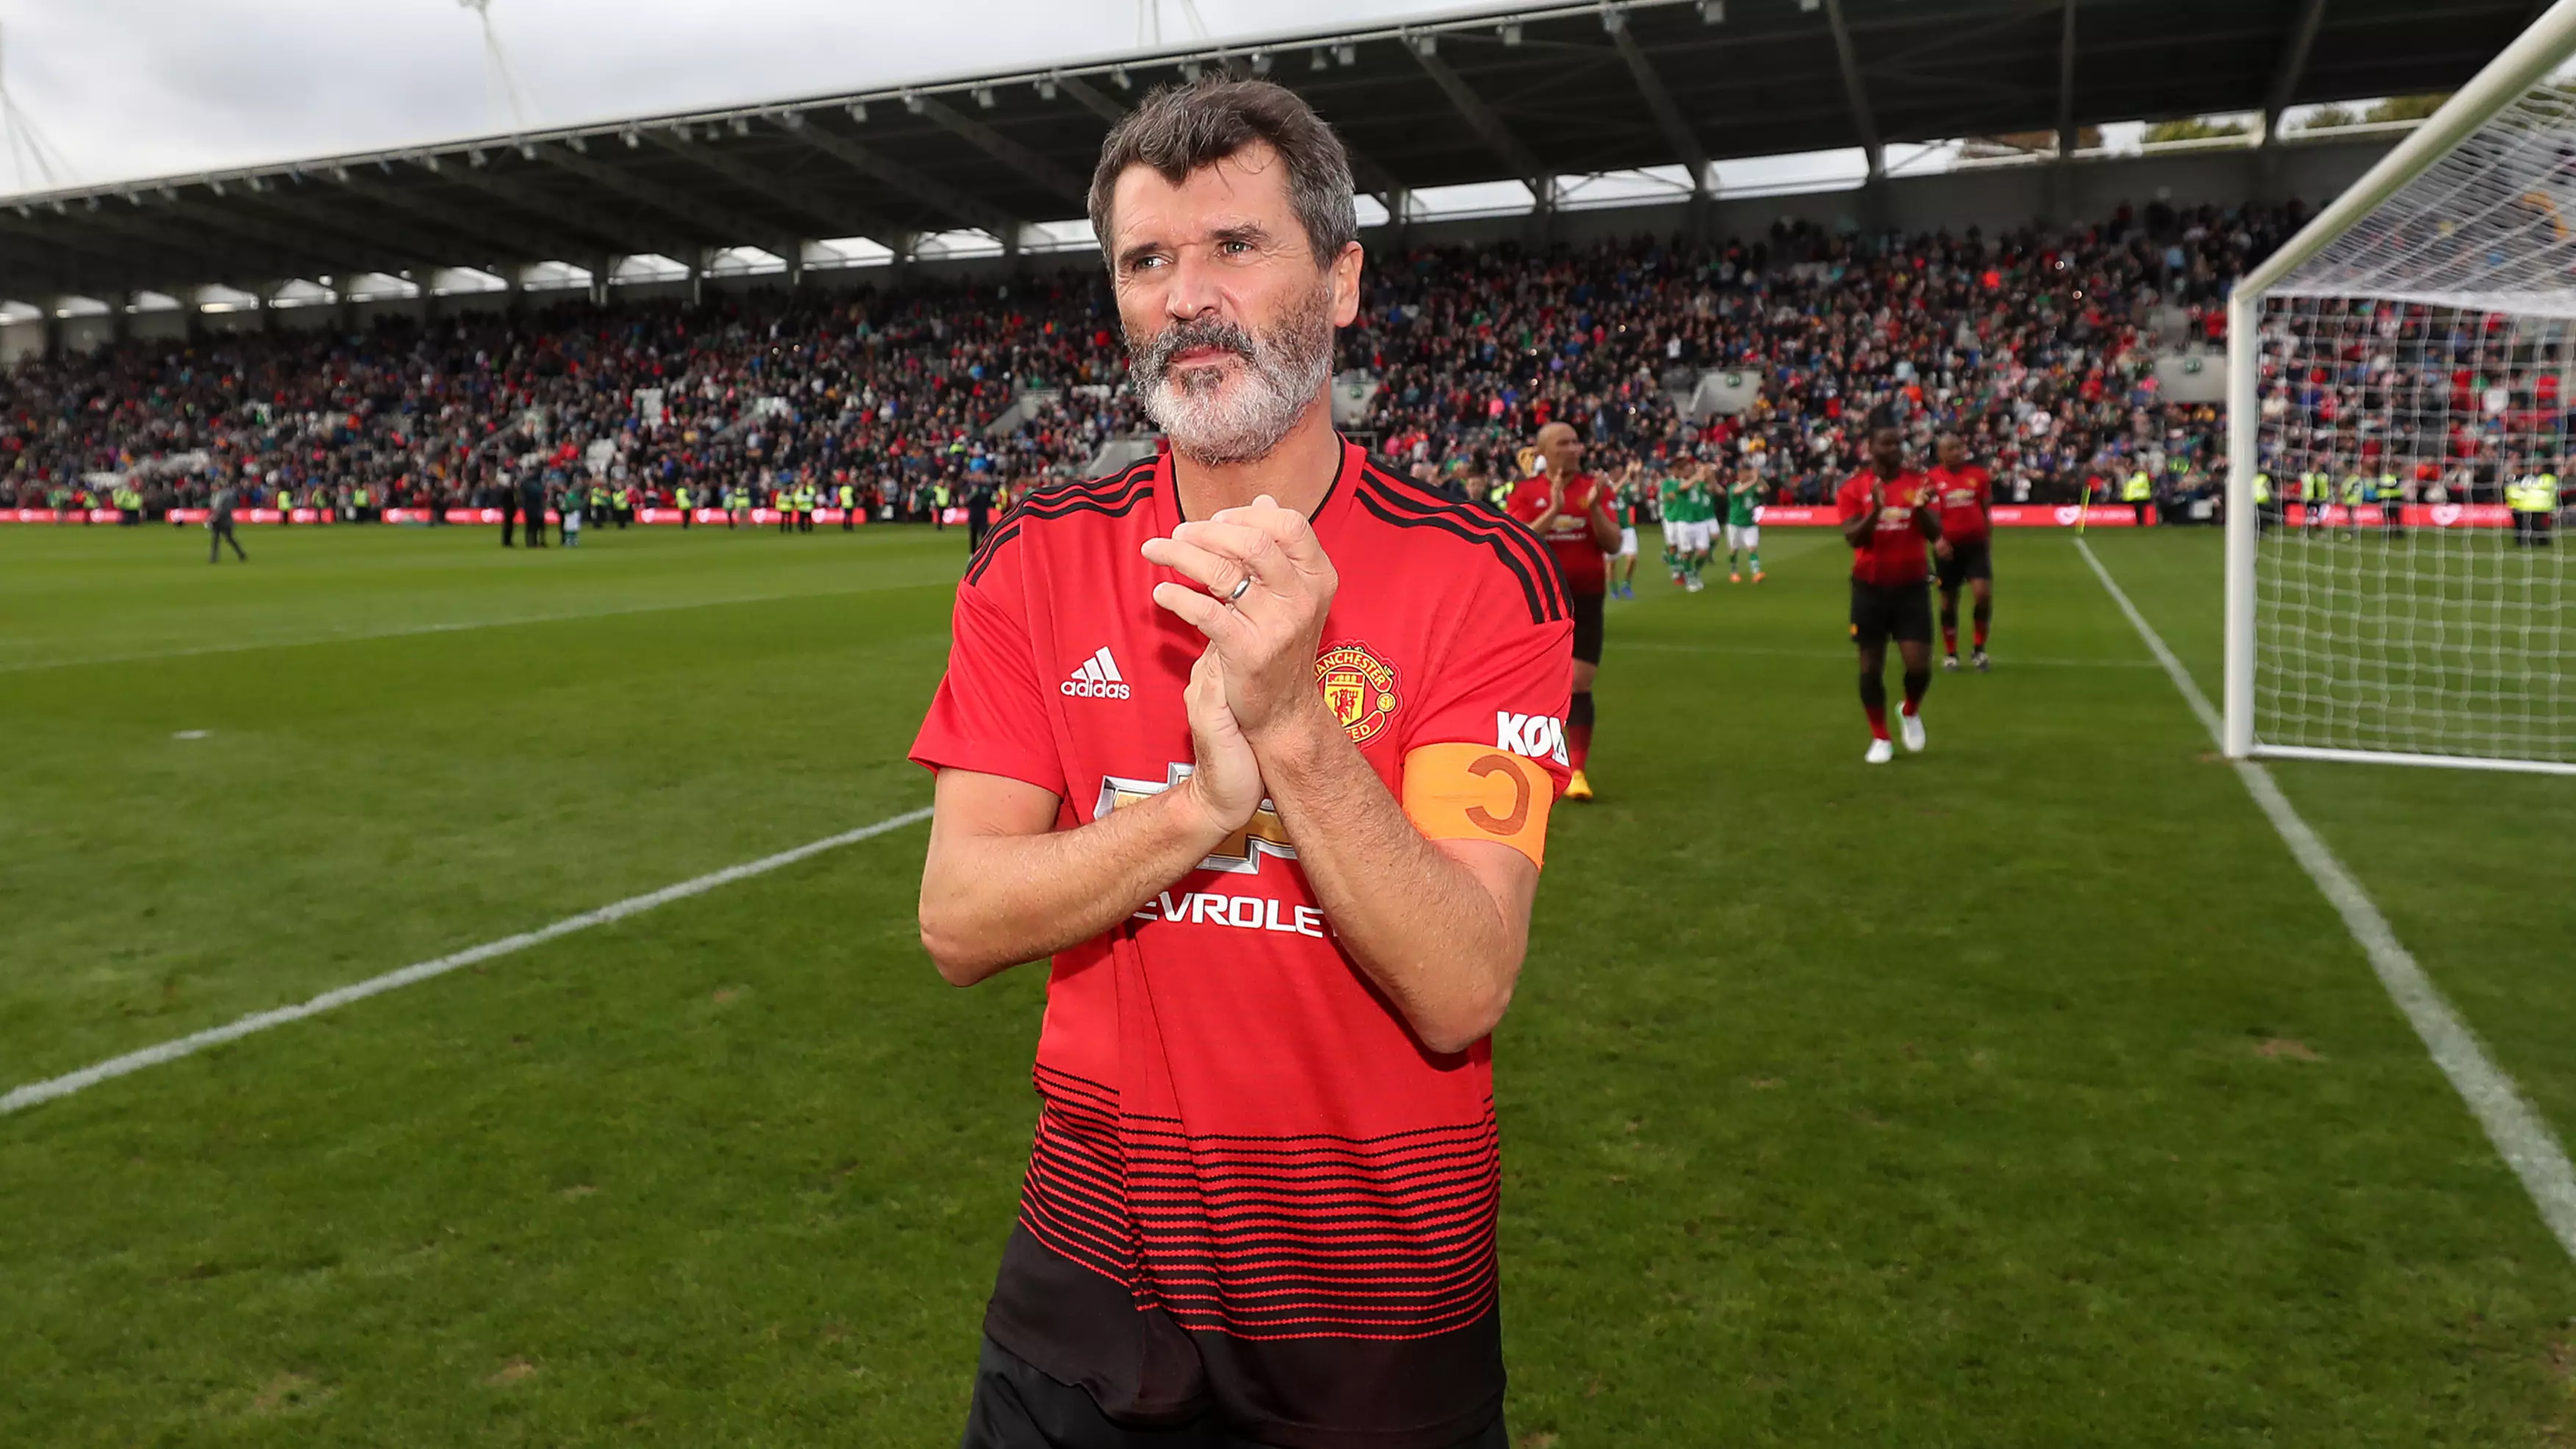 The Incredible Moment Roy Keane Returned To Play For Manchester United 12 Years On